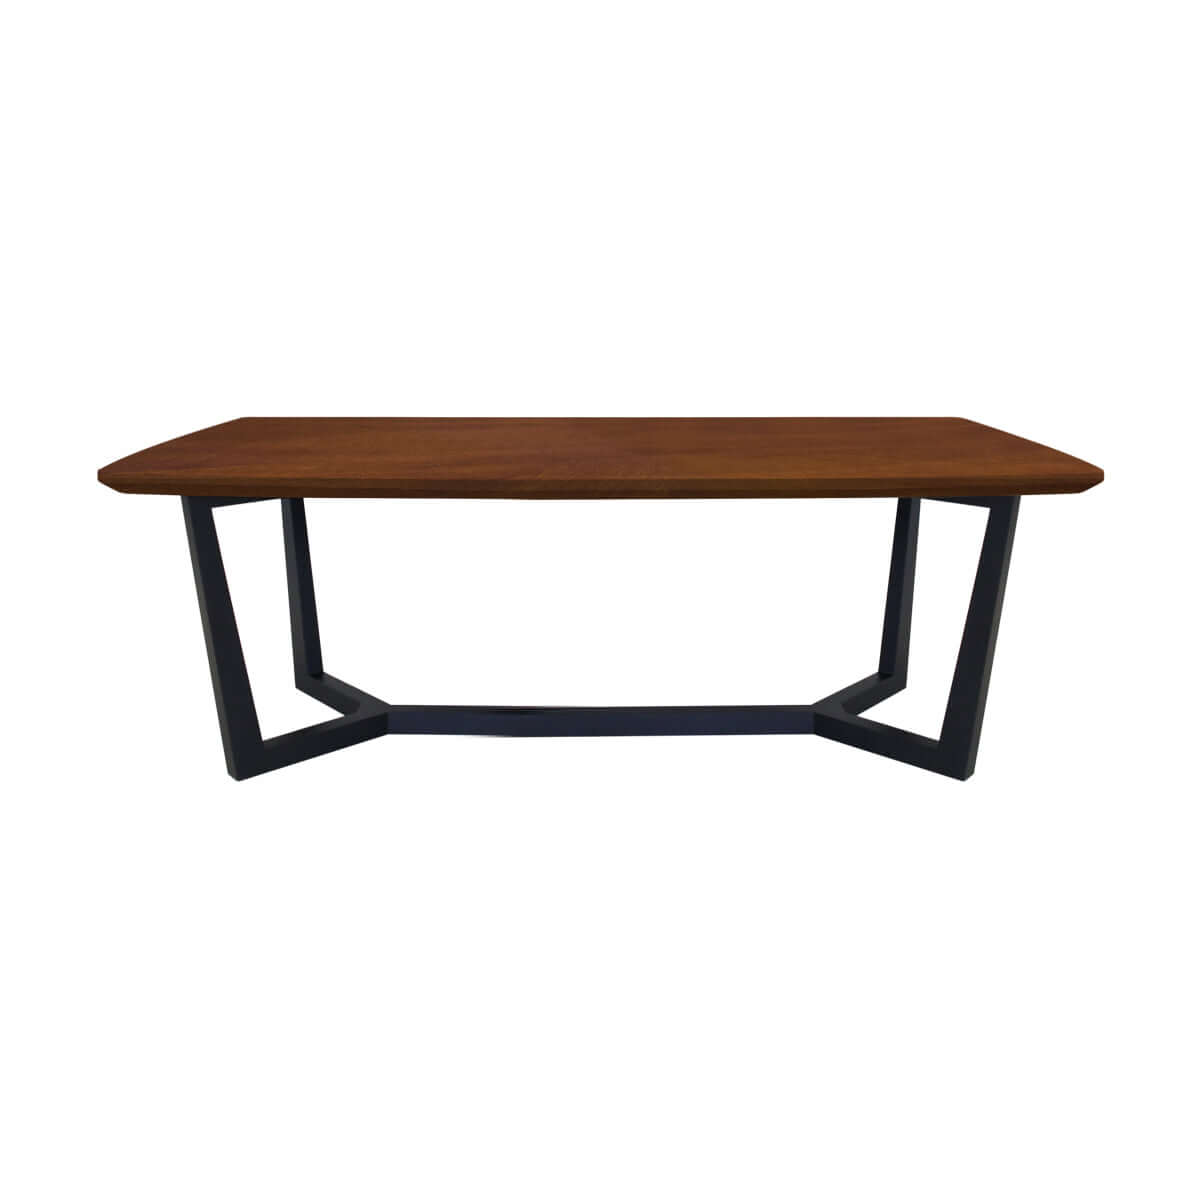 Indonesia online furniture - contemporary, Lyra Top High Gloss Dining Table